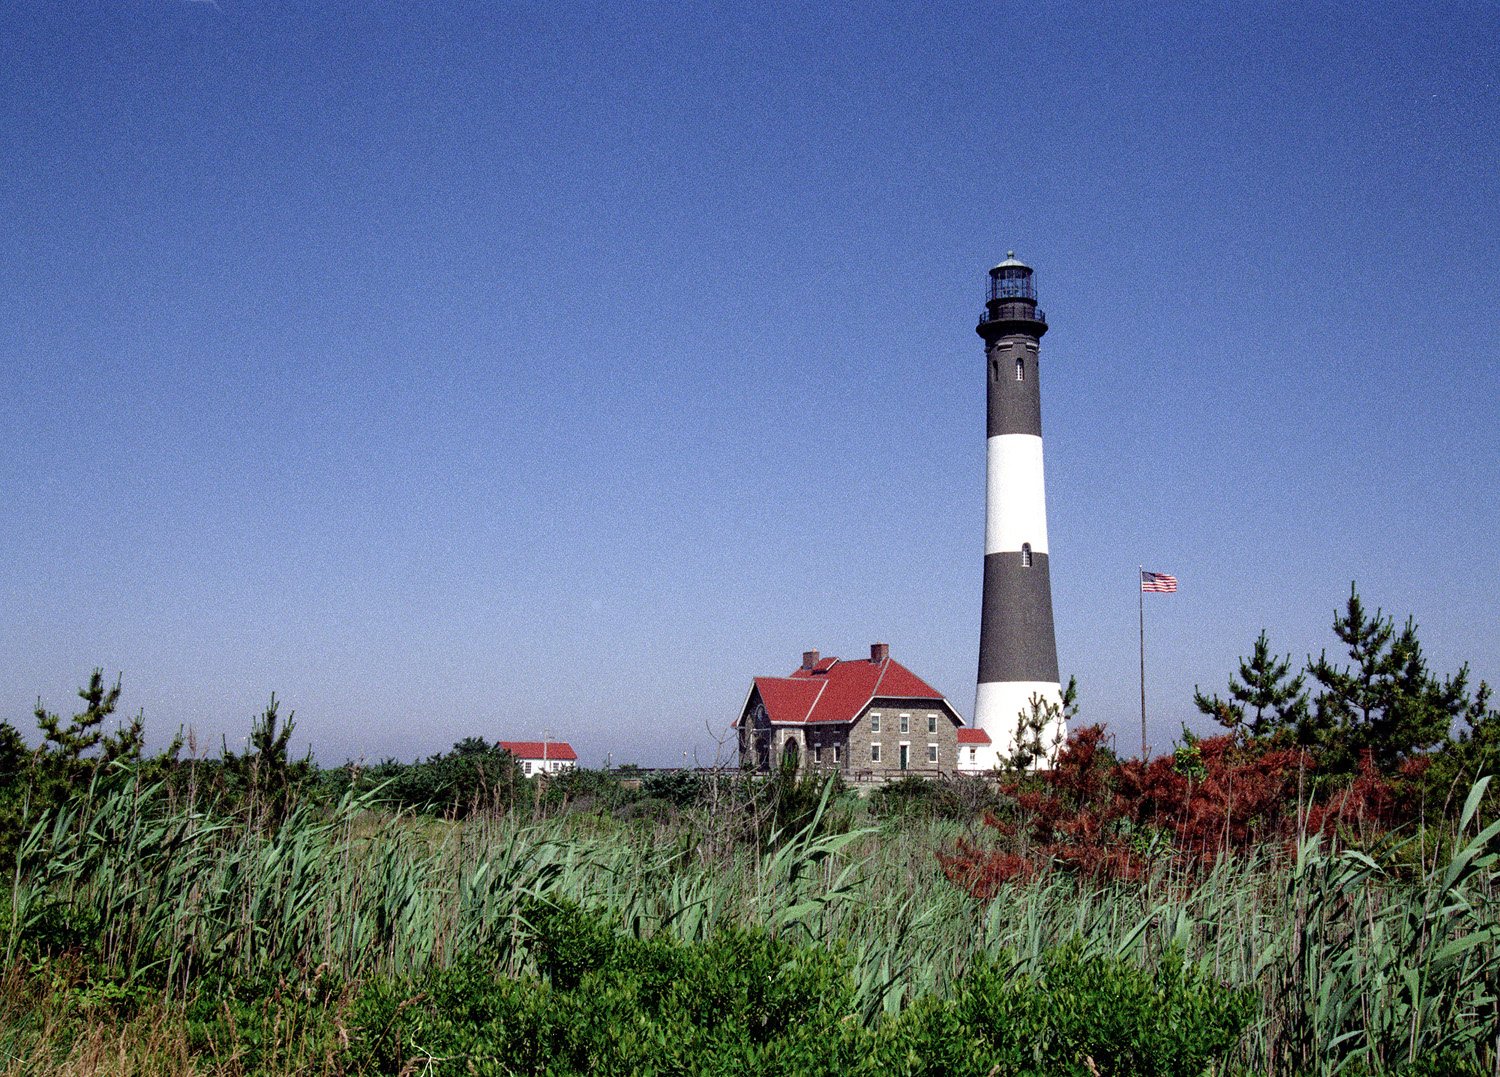 the old lighthouse is located next to the house